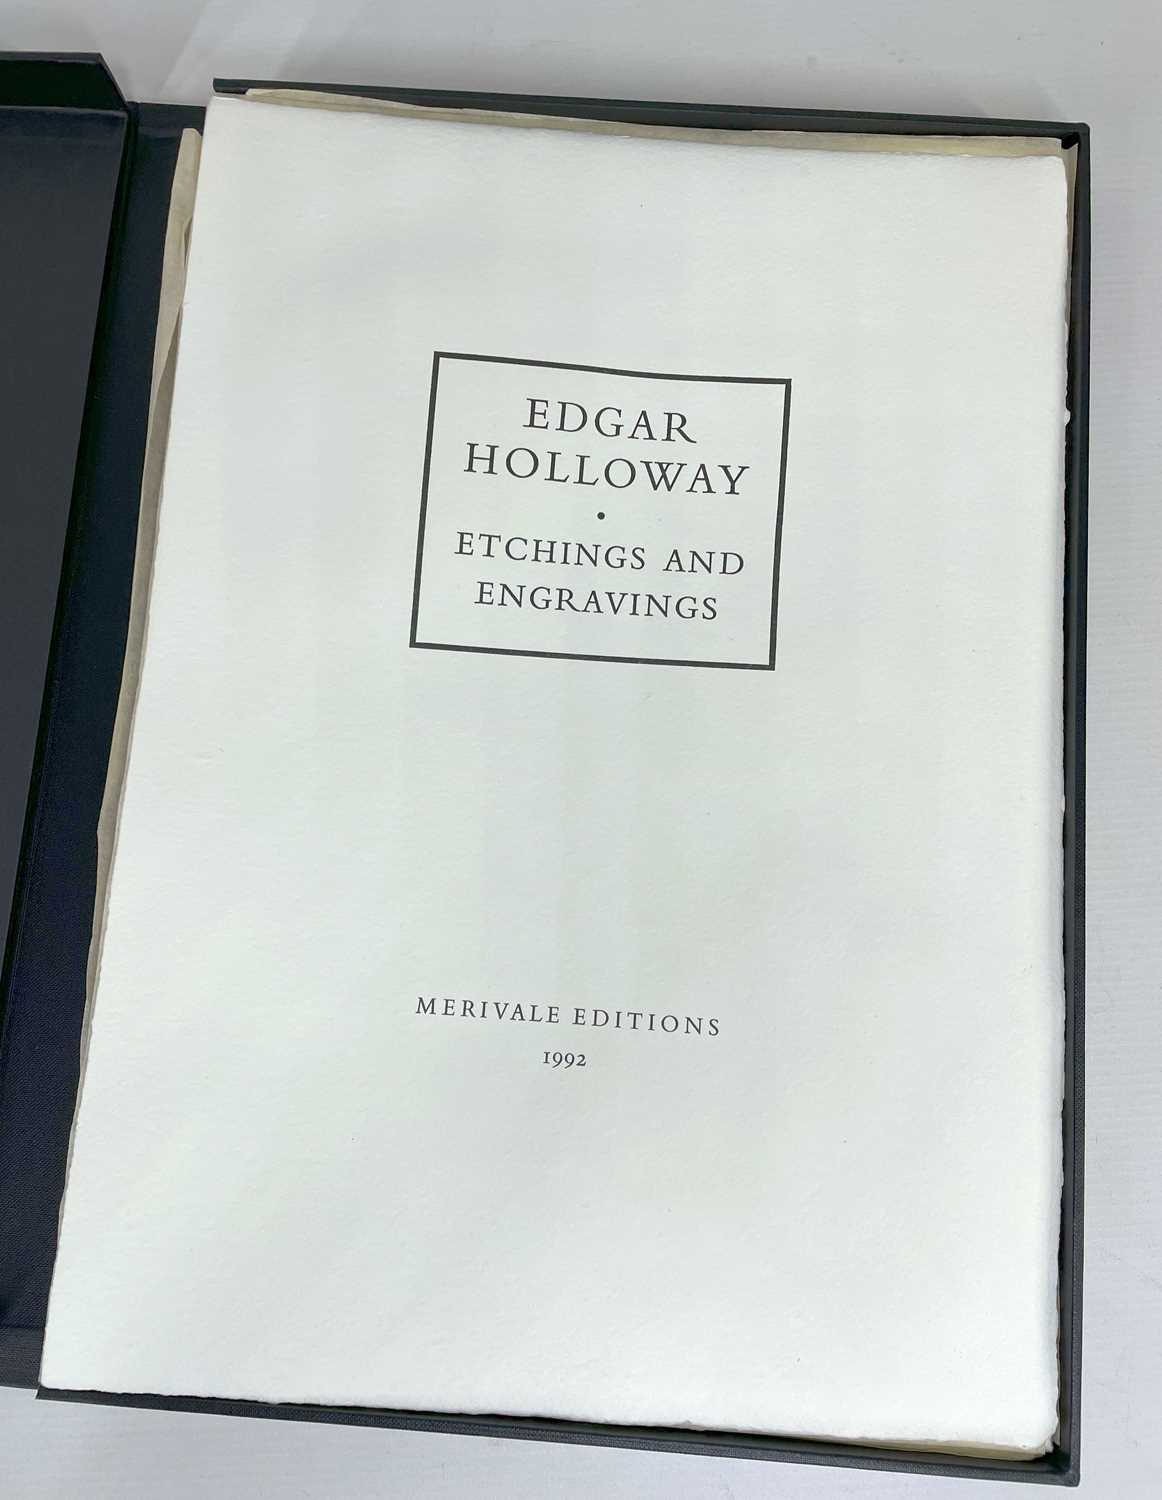 ‡ EDGAR HOLLOWAY limited edition (7/40) portfolio of seven etchings and engravings produced by - Image 3 of 13